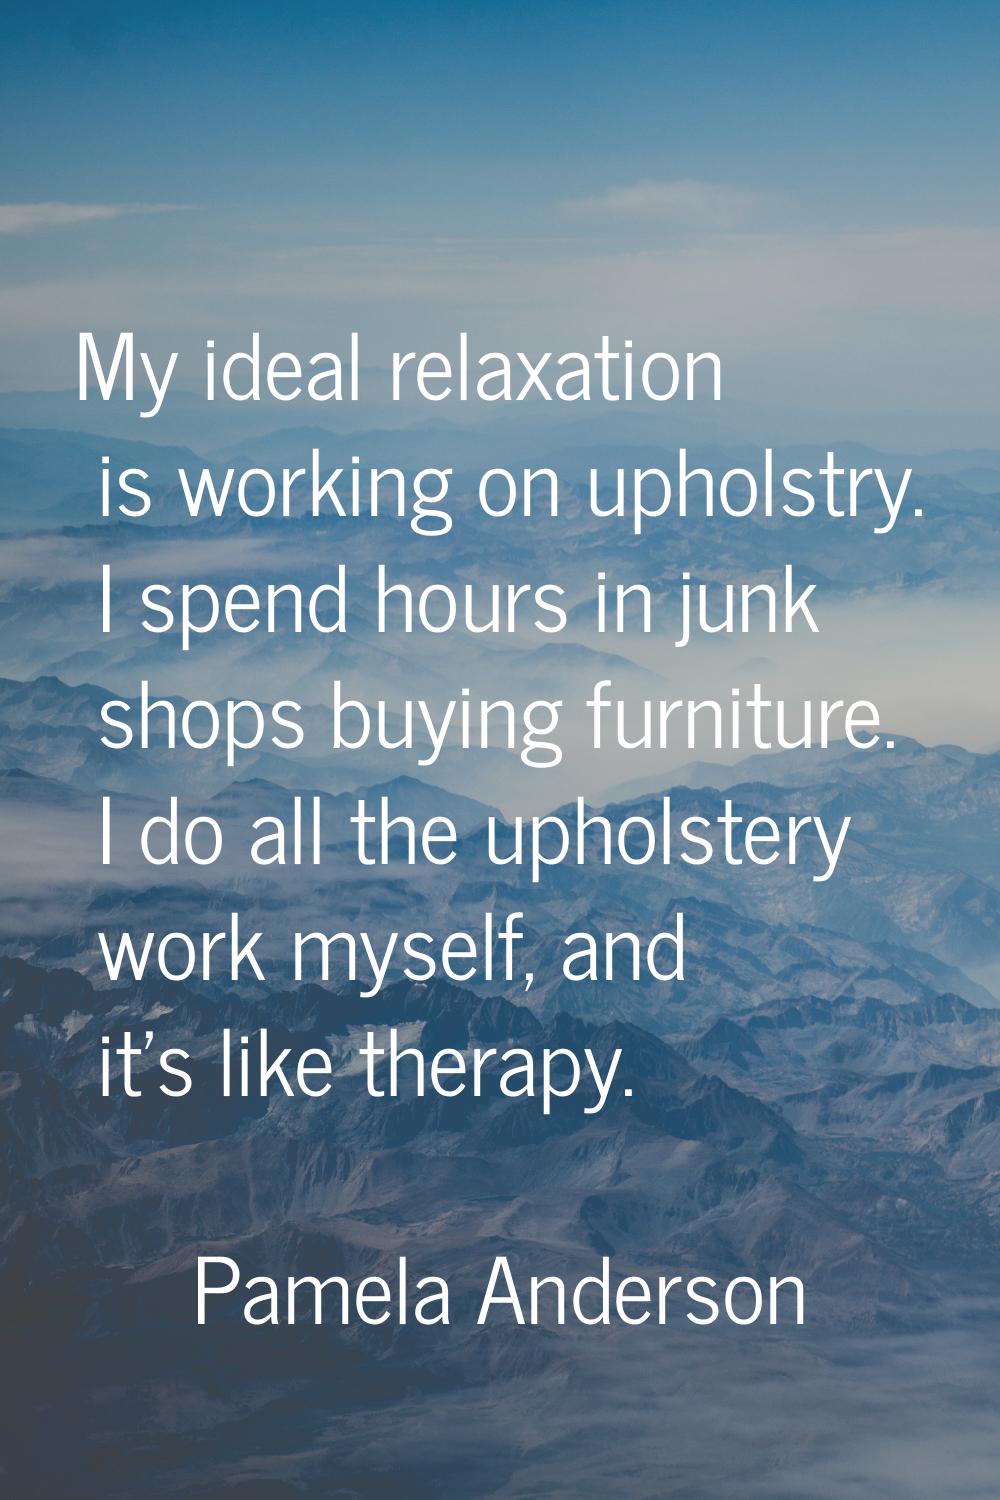 My ideal relaxation is working on upholstry. I spend hours in junk shops buying furniture. I do all